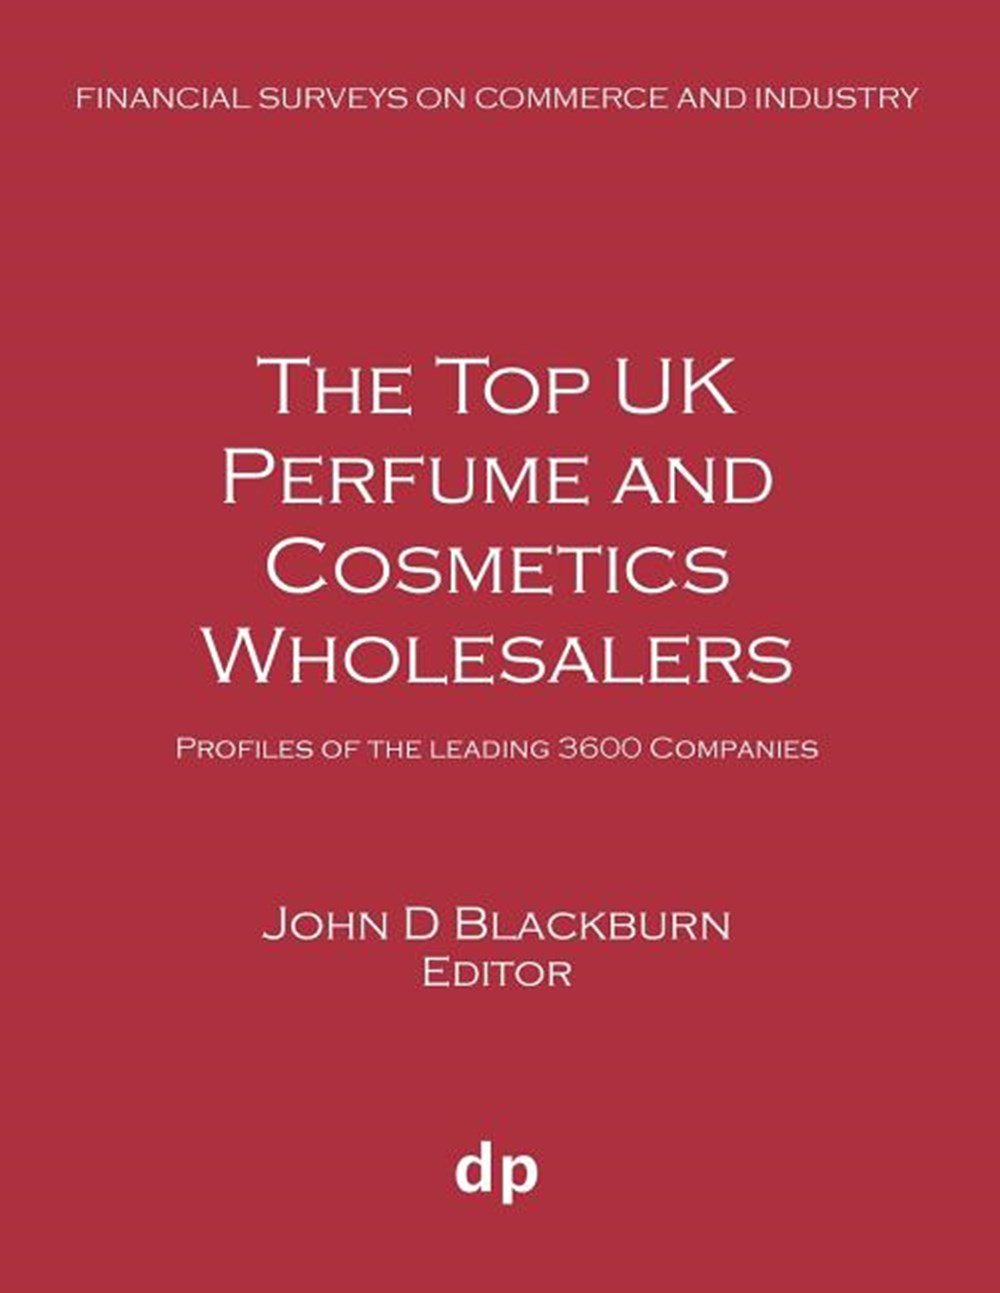 Top UK Perfume and Cosmetics Wholesalers: Profiles of the leading 3600 companies (Summer 2019)